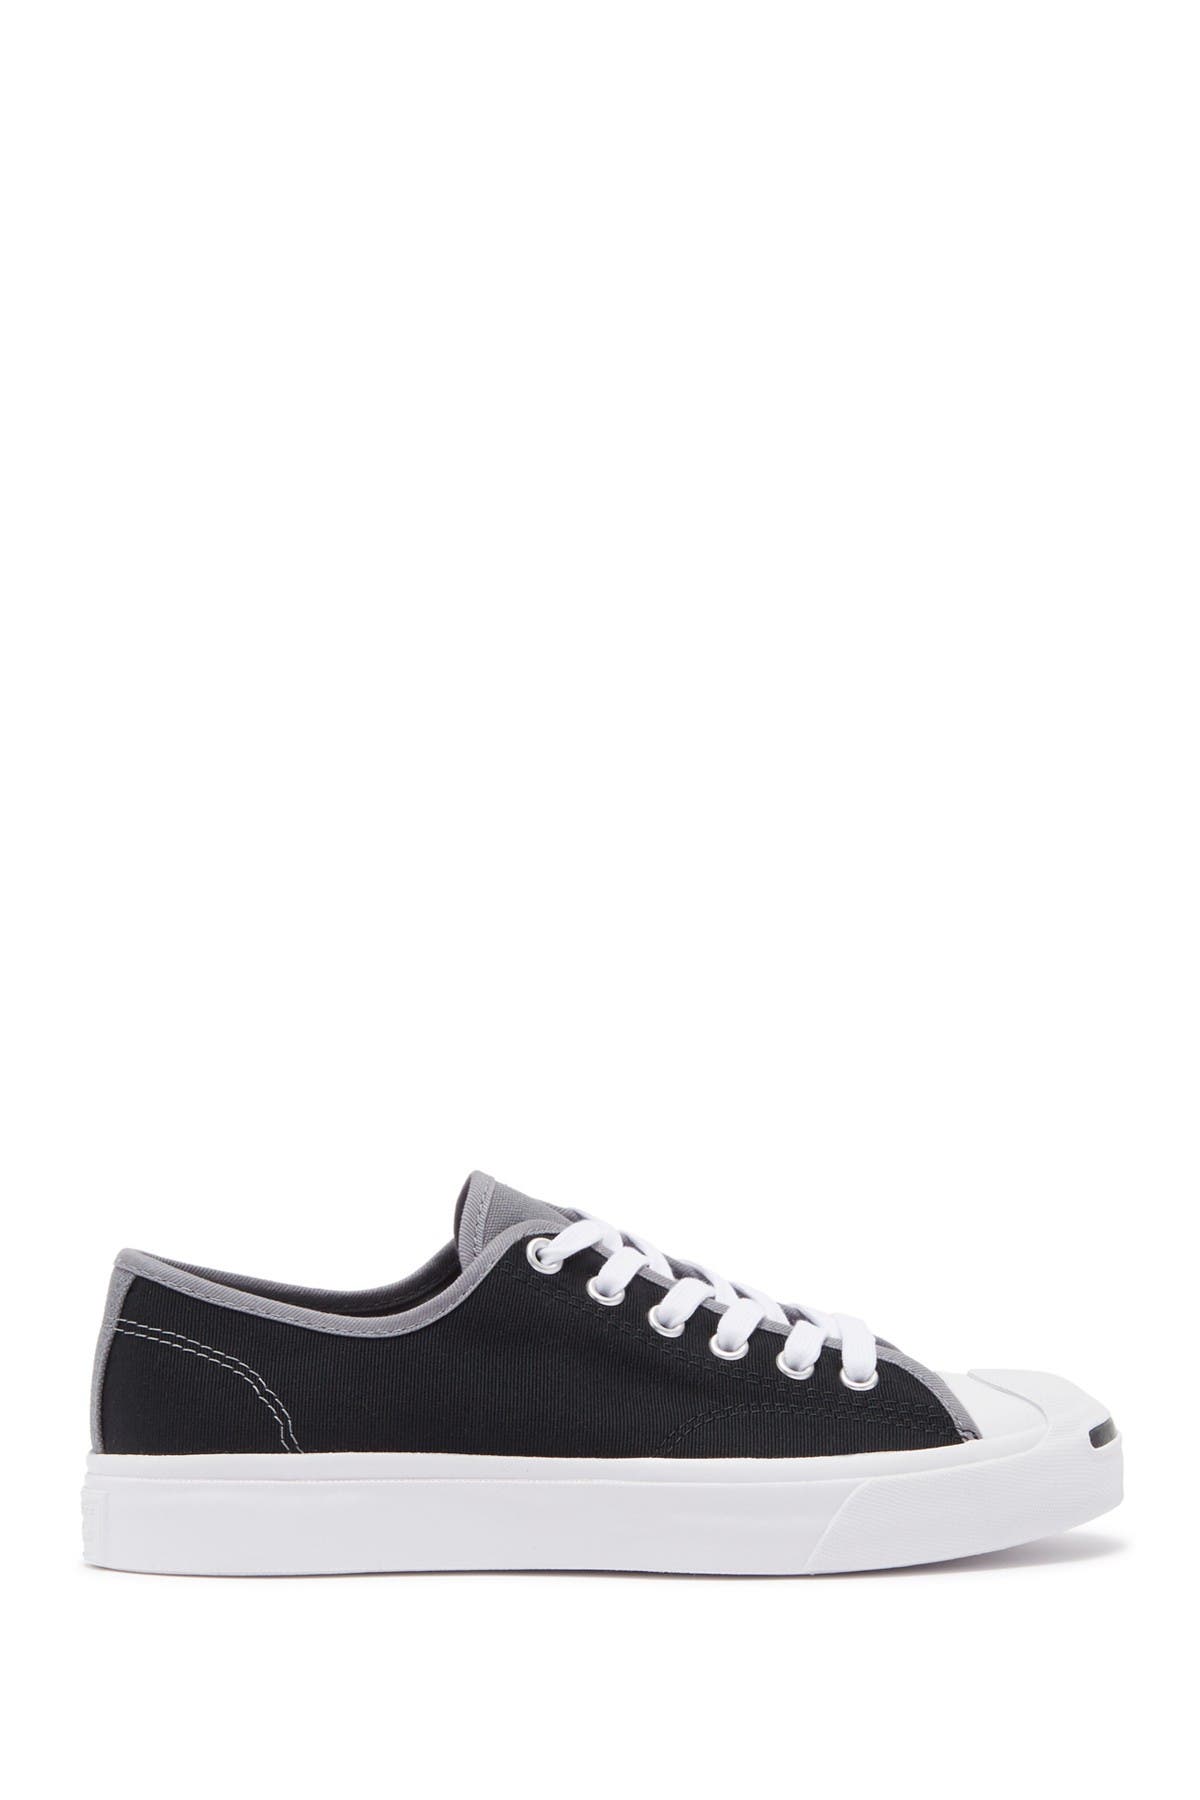 Converse Jack Purcell Two-tone Oxford Sneaker In Open Grey4 | ModeSens